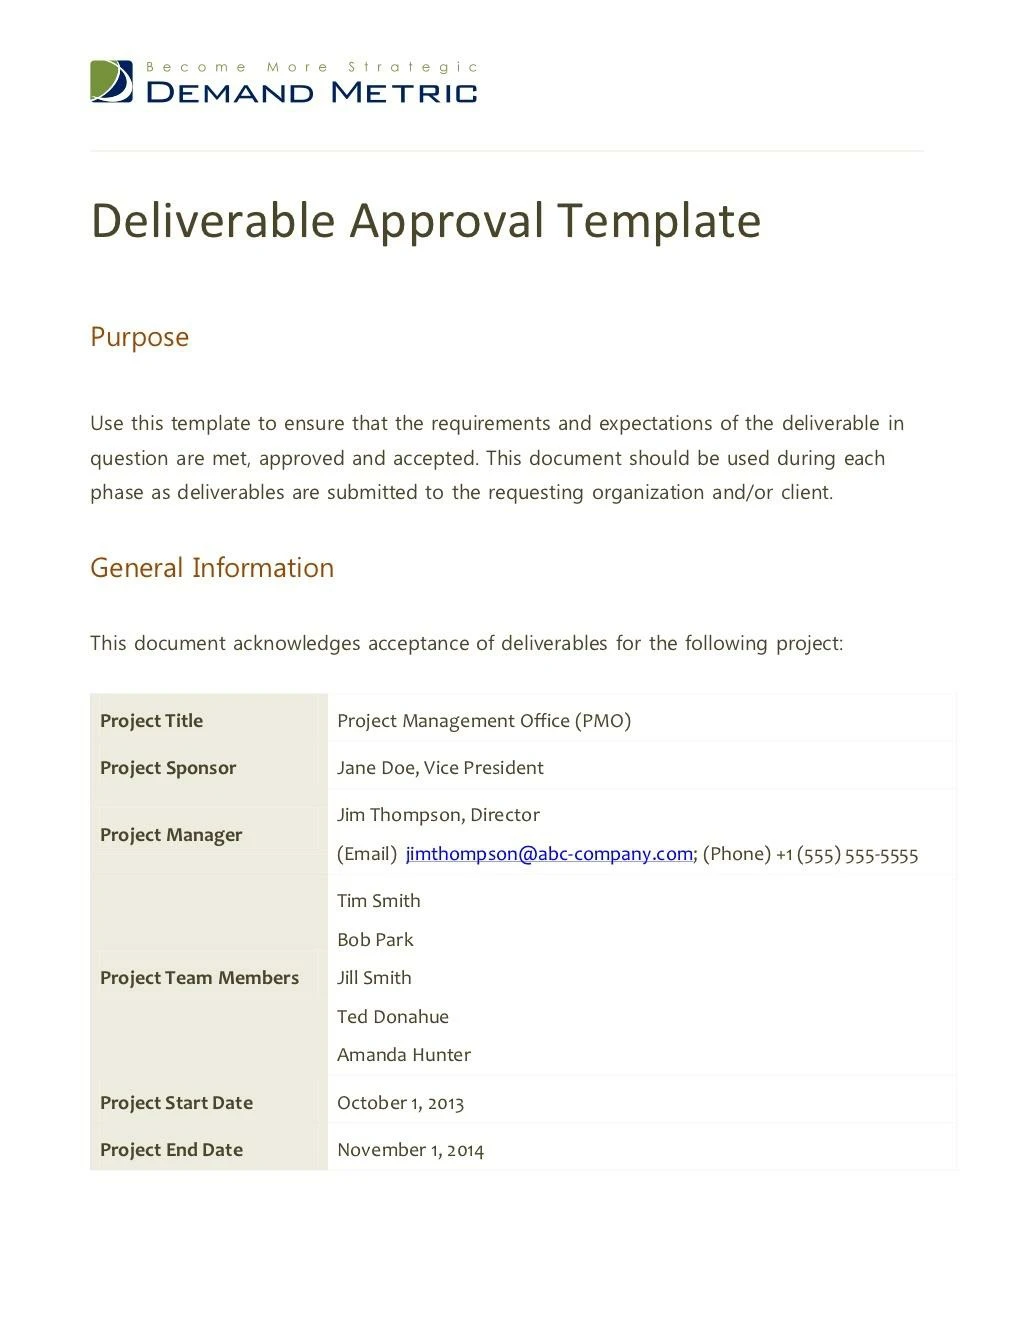 deliverable approval template